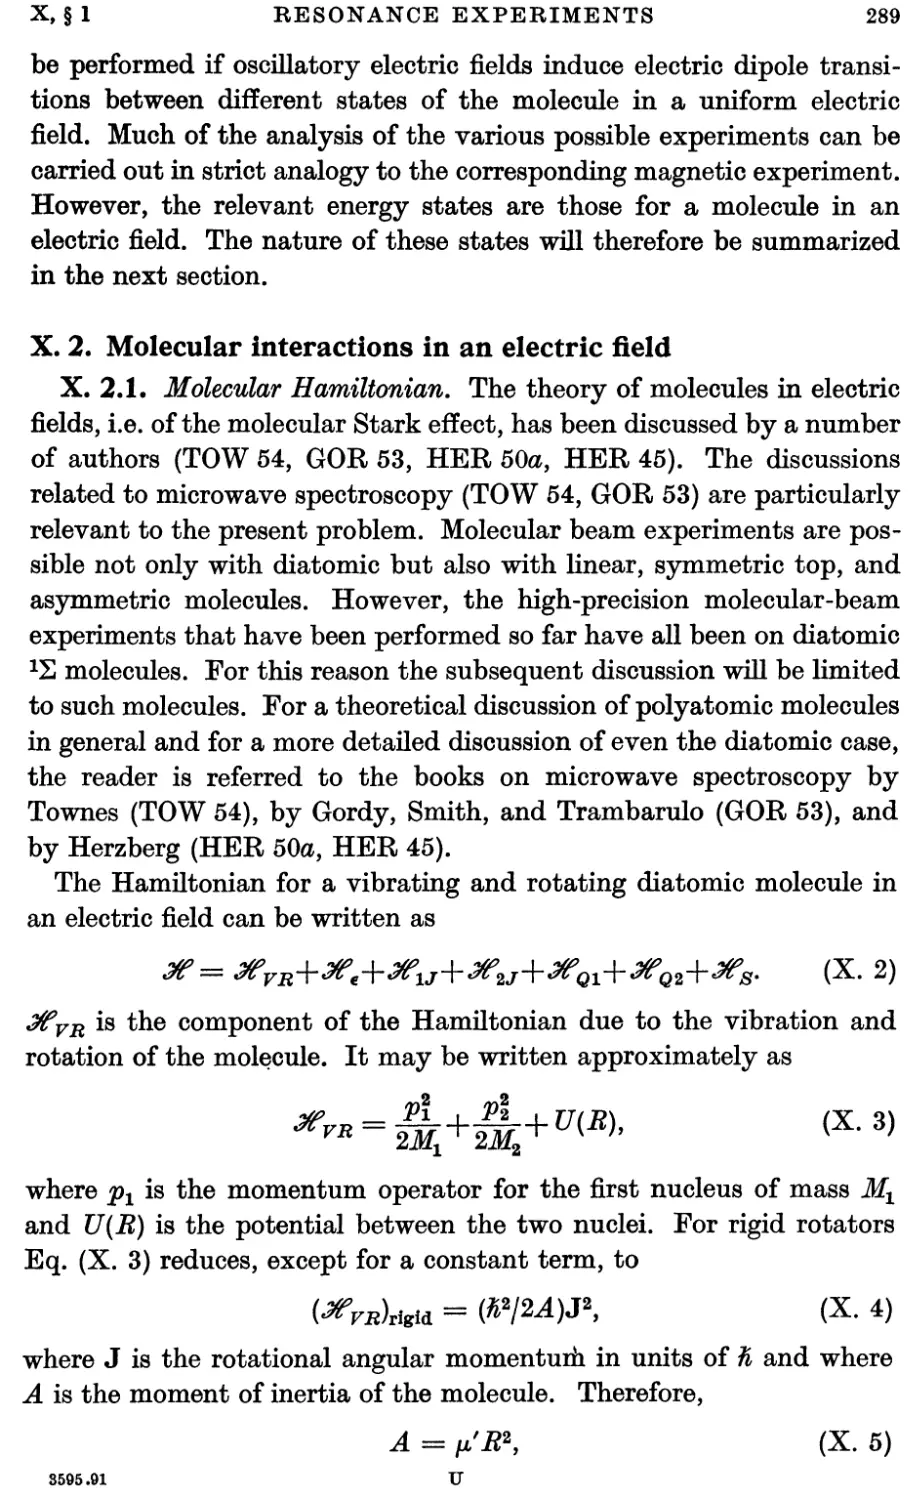 X.2. Molecular Interactions in an Electric Field